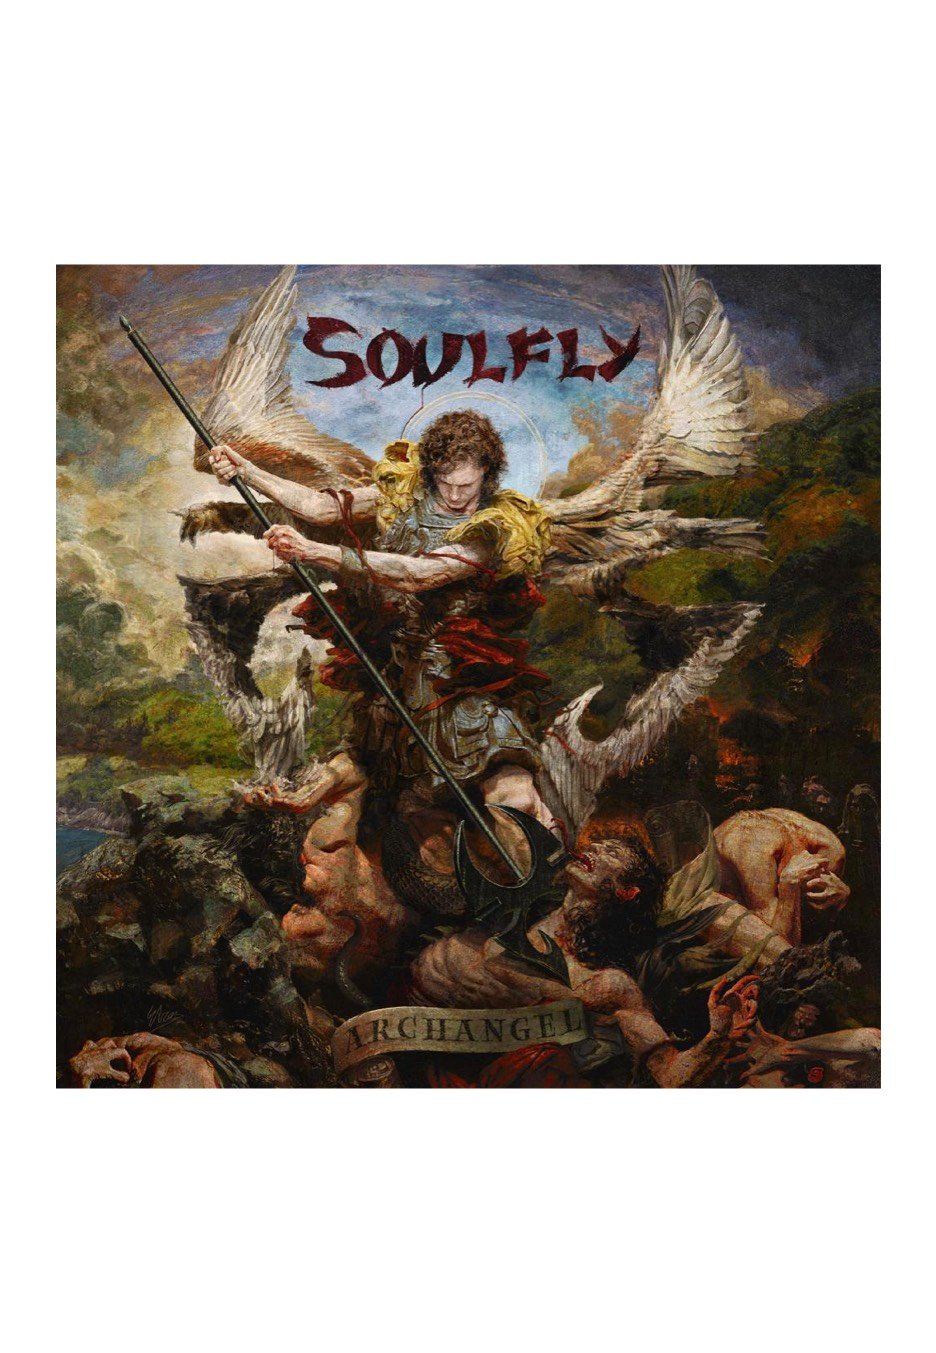 Soulfly - Archangel - CD | Neutral-Image